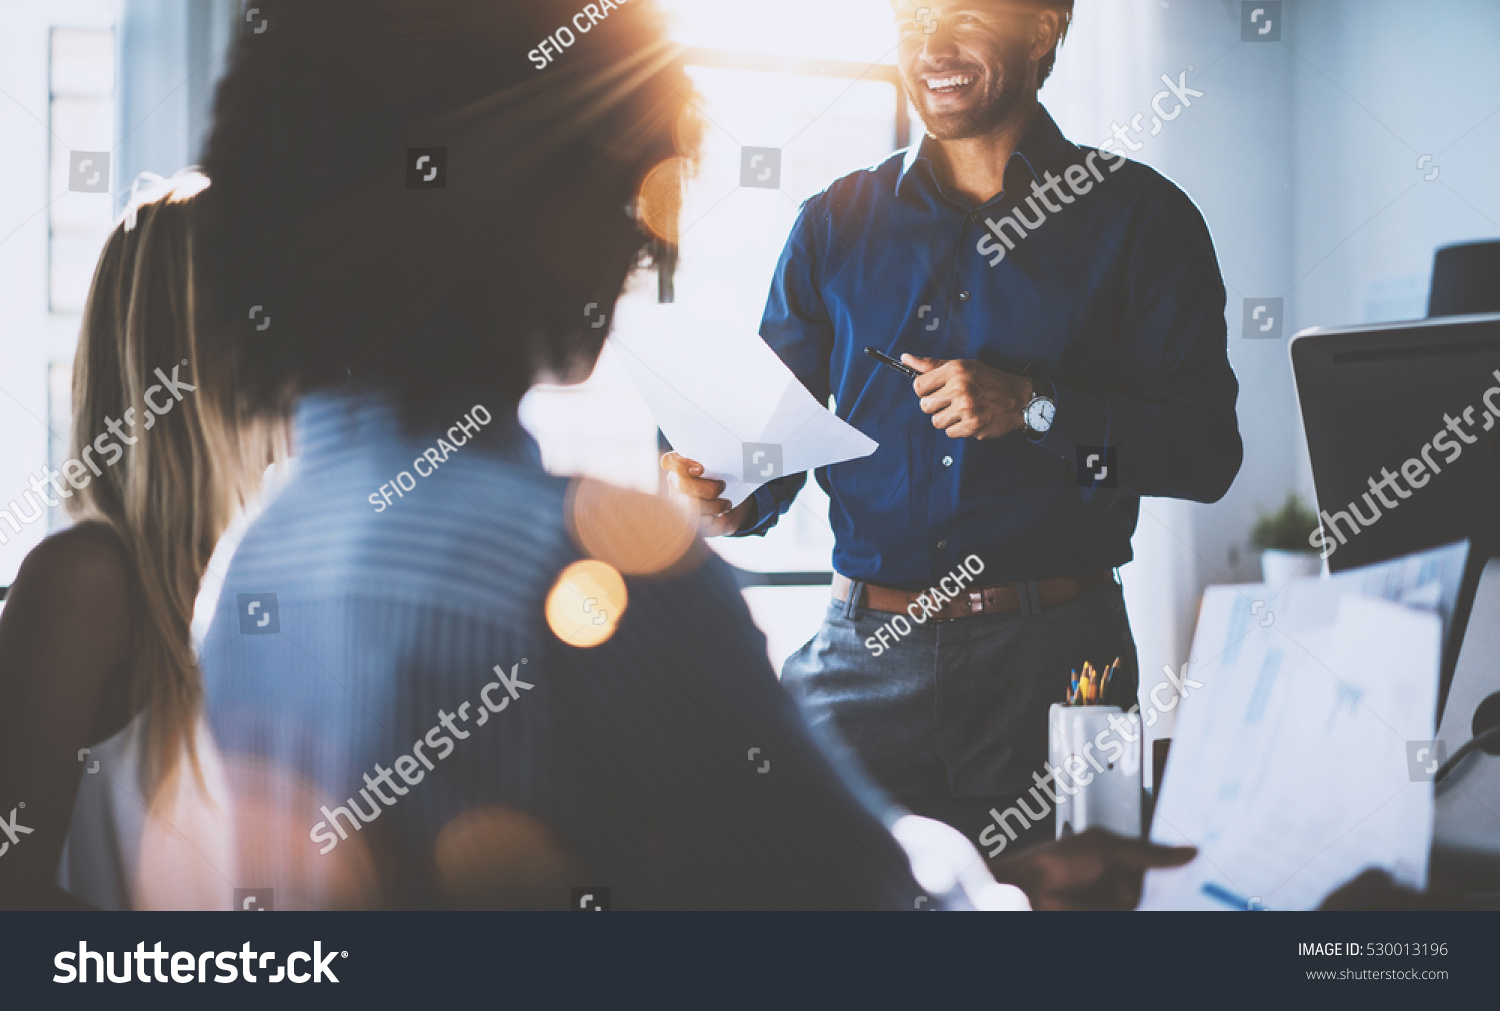 Hispanic businessman holding papers hands and smiling.Young team of coworkers making great business discussion in modern coworking office.Teamwork people concept.Horizontal, blurred background, flares #530013196